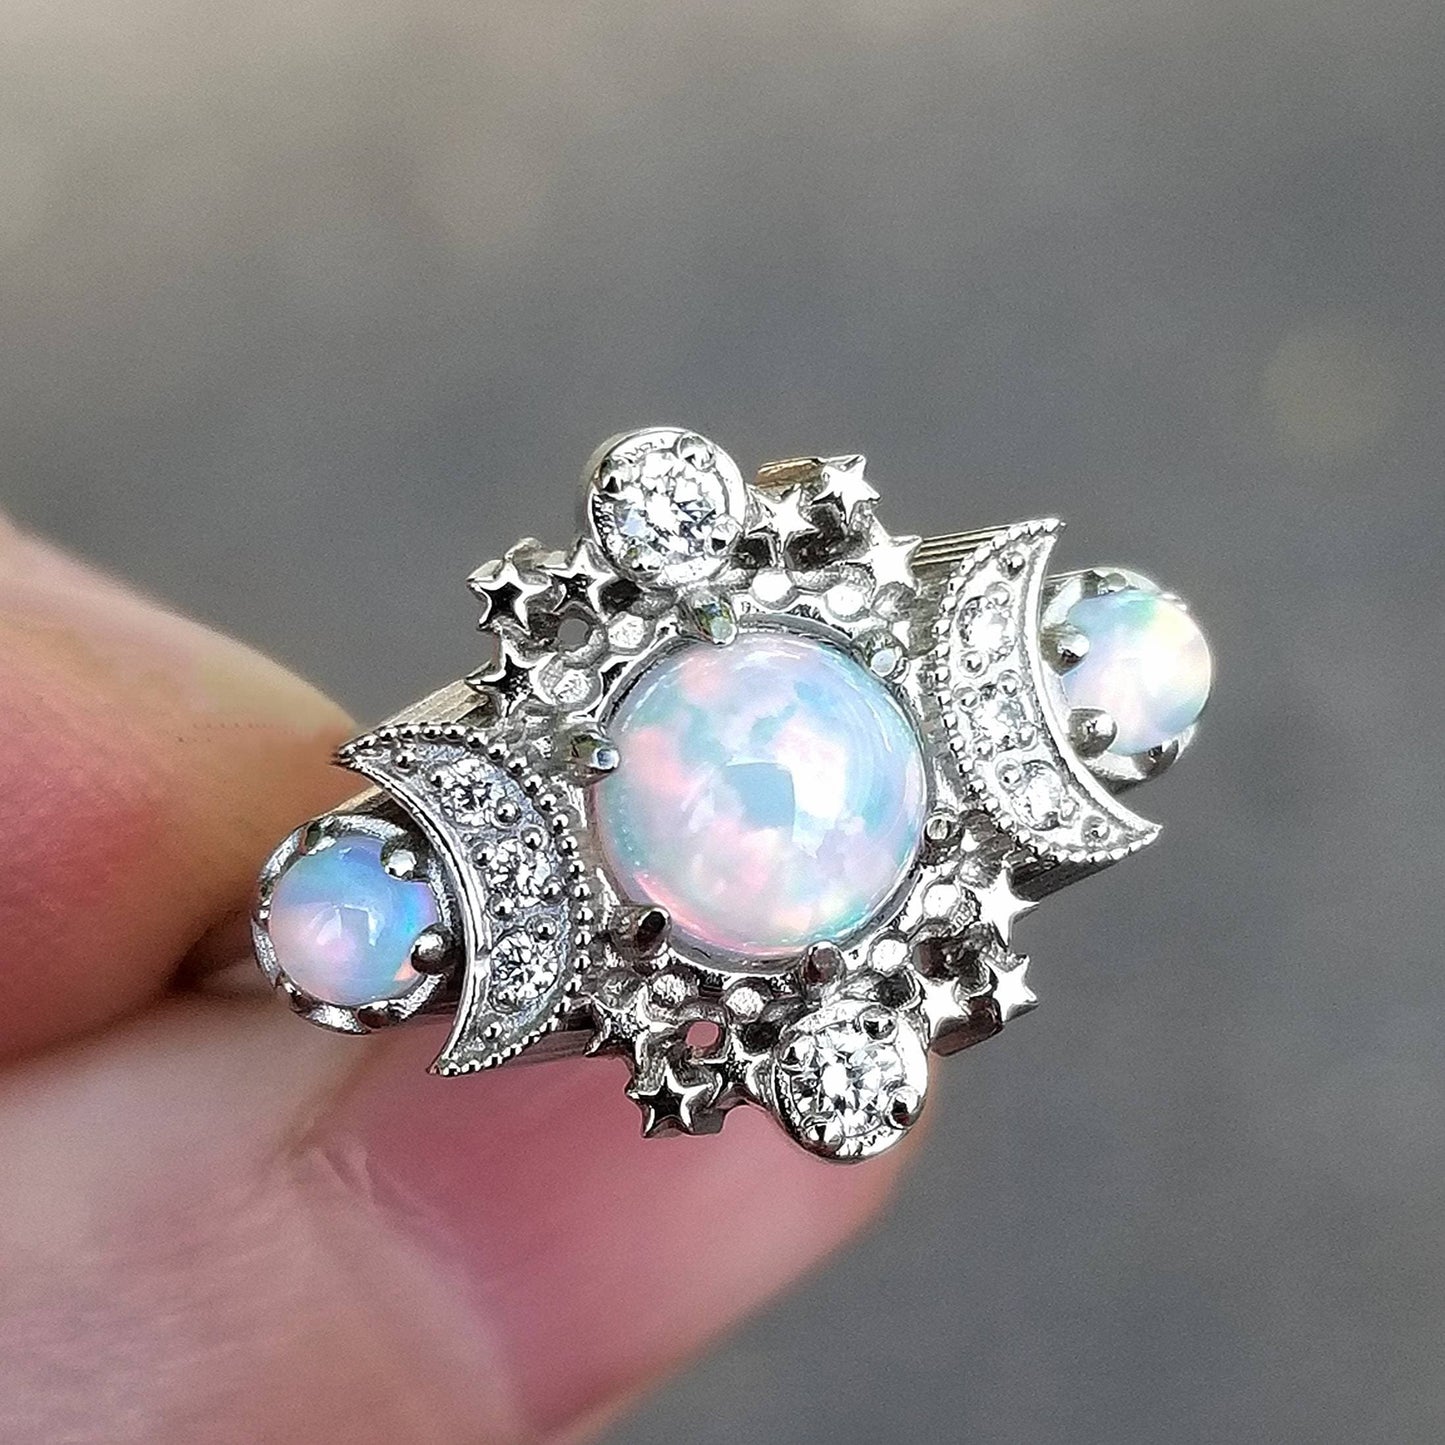 Chatham Opal Cosmos Moon Witchy Engagement Ring - Palladium White Gold Celestial 3 Stone Diamond Stardust Ring -Unique Fine Jewelry